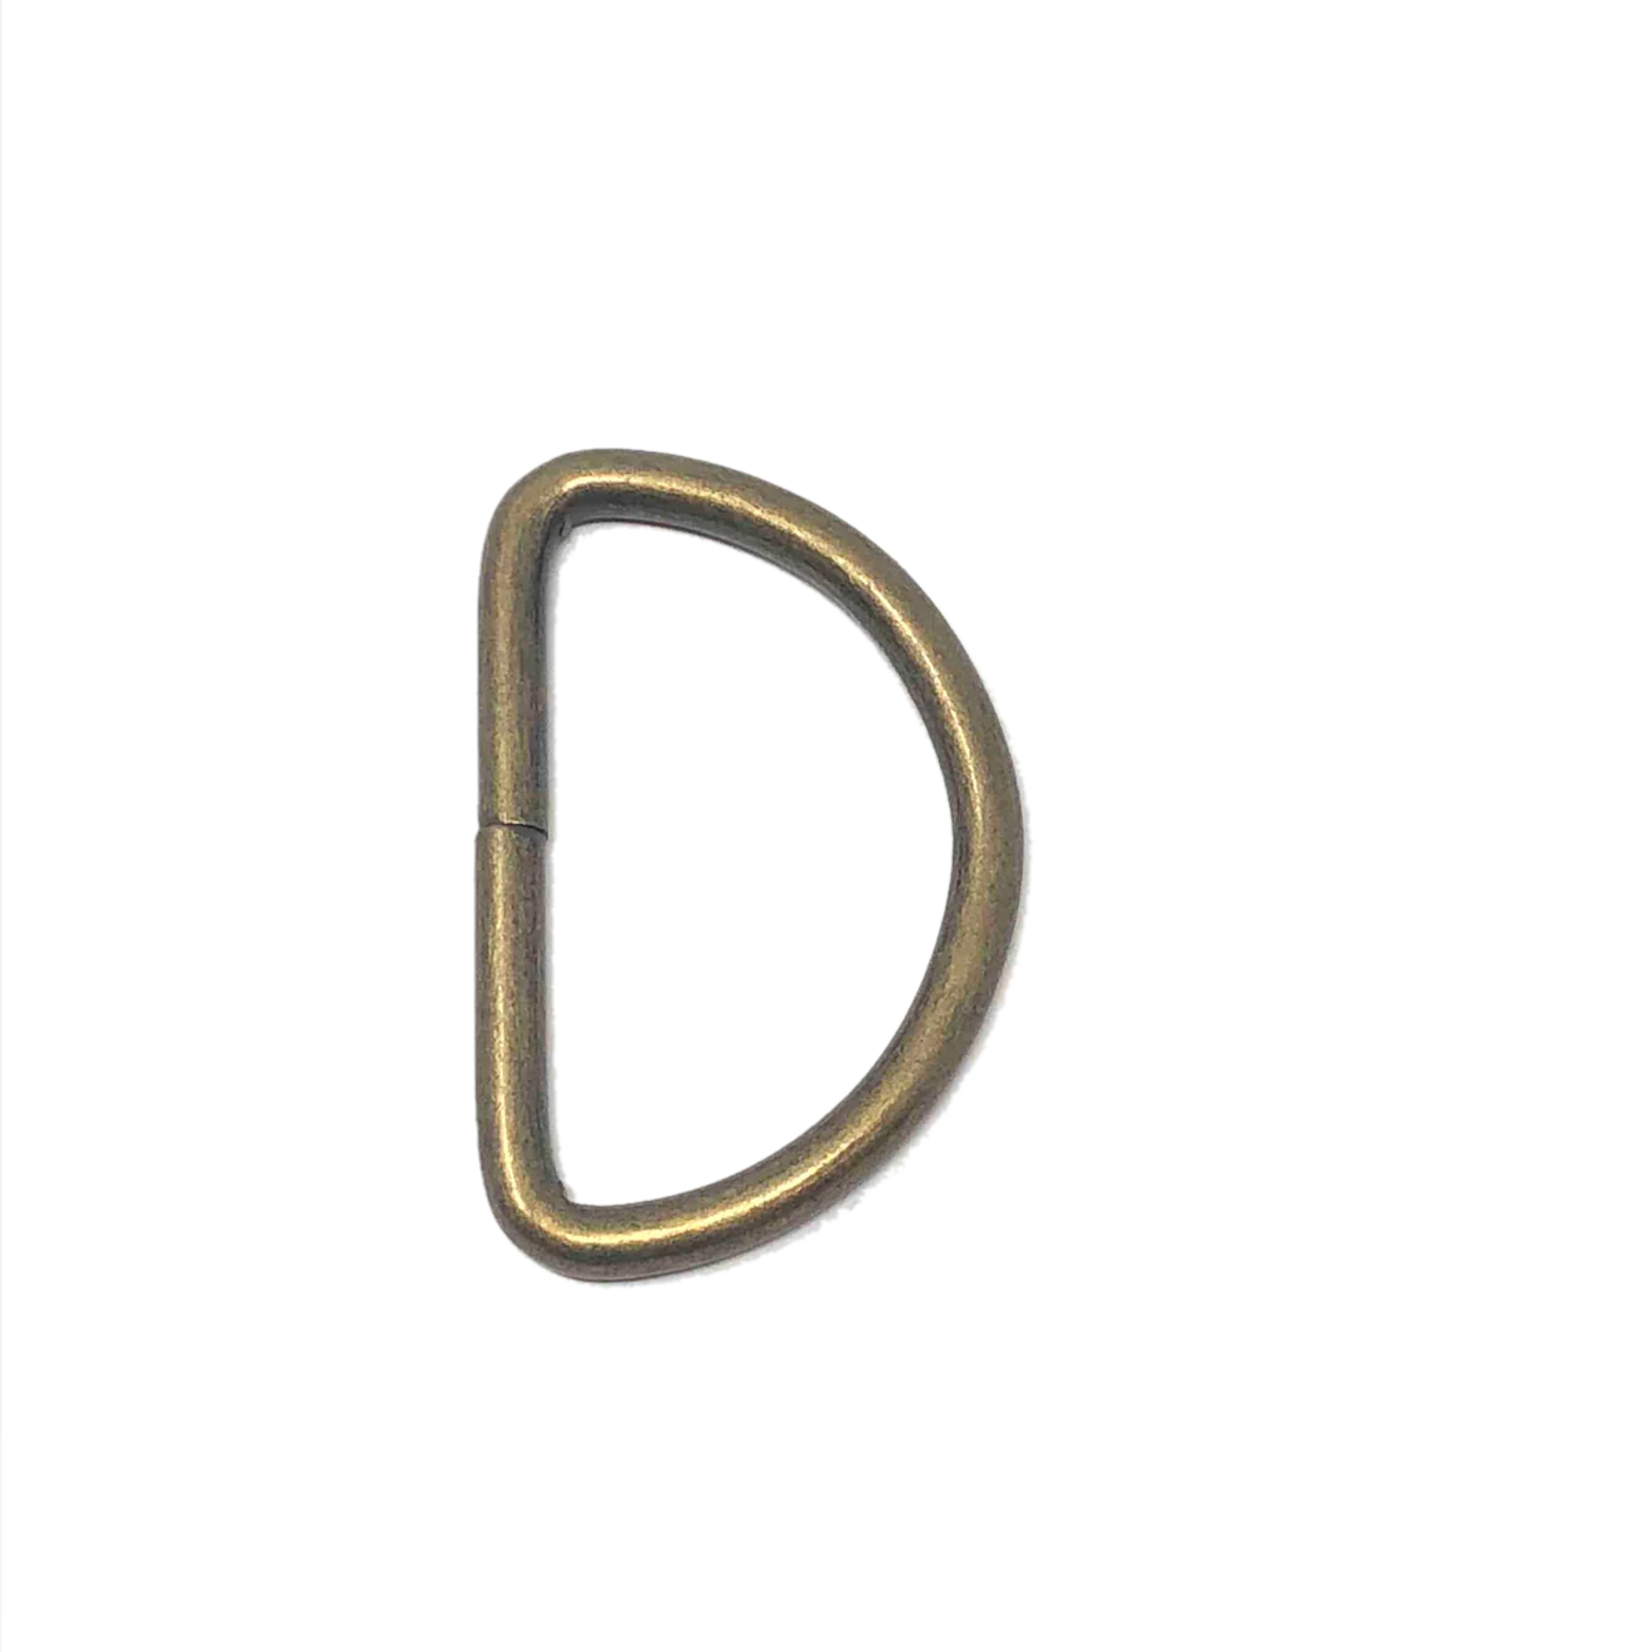 Metal D Ring - Brass 44mm/1.75 Inches (100pcs)